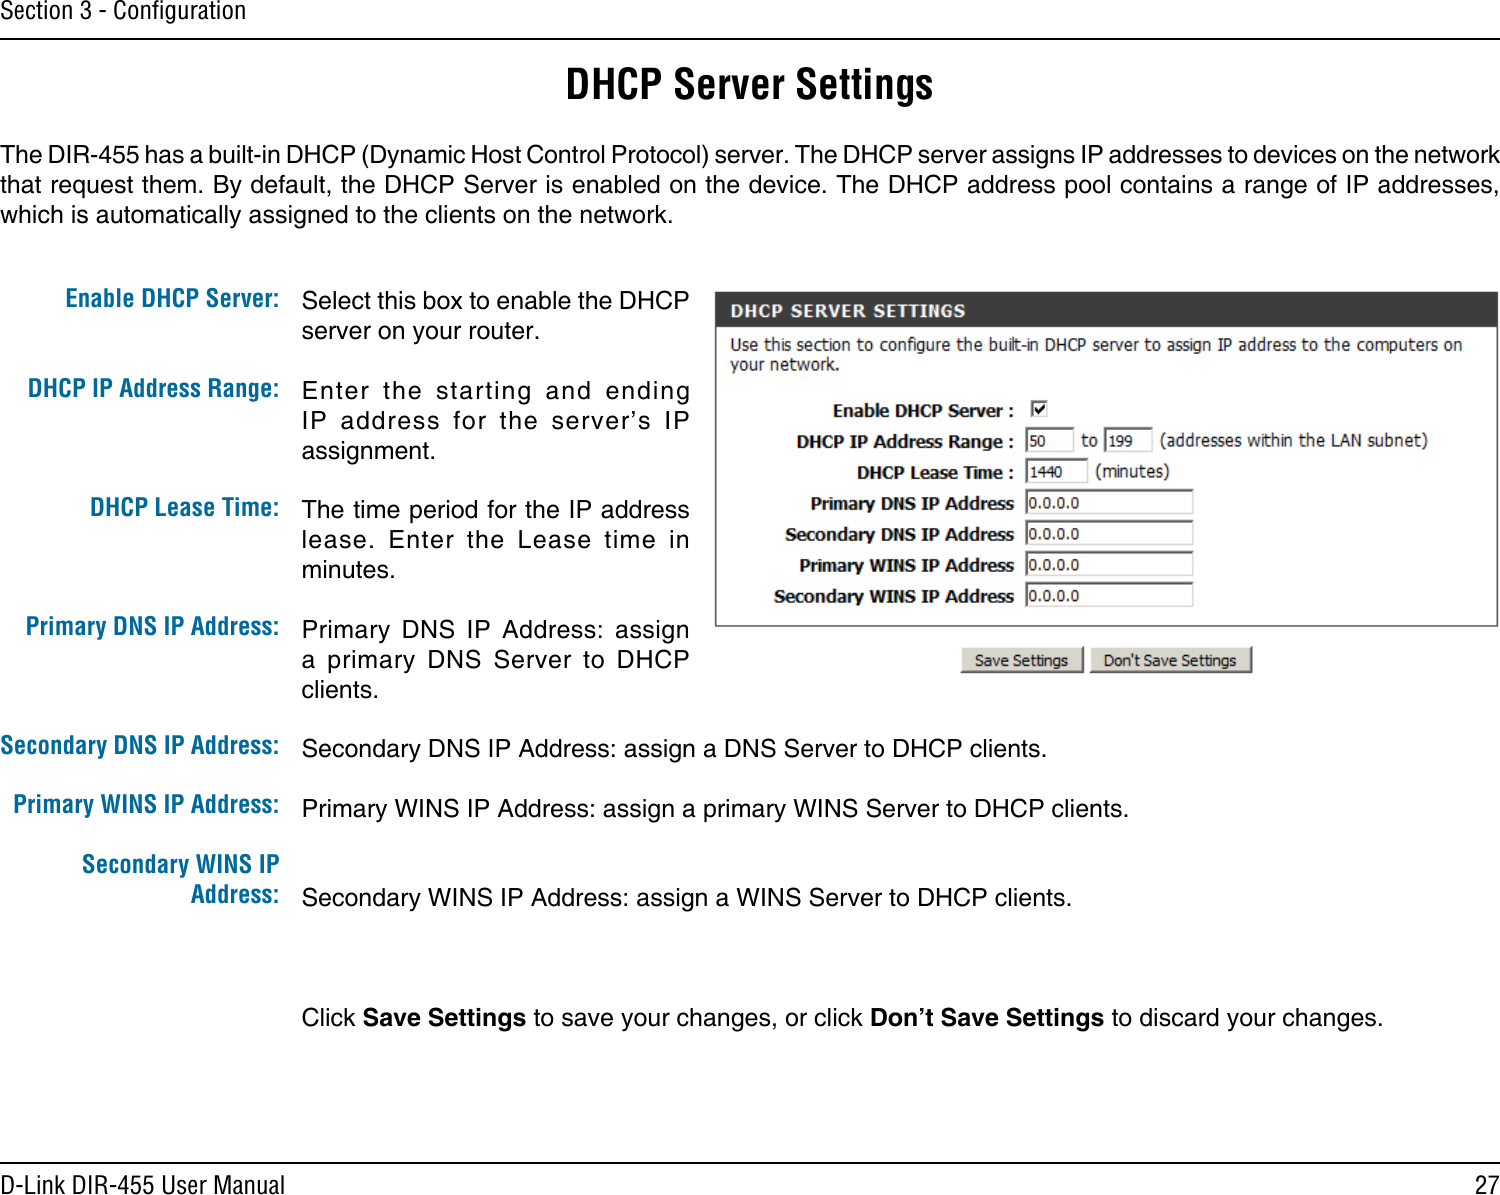 27D-Link DIR-455 User ManualSection 3 - ConﬁgurationSelect this box to enable the DHCP server on your router. Enter  the  starting  and  ending IP  address  for  the  server’s  IP assignment.The time period for the IP address lease.  Enter  the  Lease  time  in minutes.Primary  DNS  IP  Address:  assign a  primary  DNS  Server  to  DHCP clients.Secondary DNS IP Address: assign a DNS Server to DHCP clients.Primary WINS IP Address: assign a primary WINS Server to DHCP clients. Secondary WINS IP Address: assign a WINS Server to DHCP clients.Click Save Settings to save your changes, or click Don’t Save Settings to discard your changes.Enable DHCP Server: DHCP IP Address Range:DHCP Lease Time:Primary DNS IP Address:Secondary DNS IP Address:Primary WINS IP Address:Secondary WINS IP Address:DHCP Server SettingsThe DIR-455 has a built-in DHCP (Dynamic Host Control Protocol) server. The DHCP server assigns IP addresses to devices on the network that request them. By default, the DHCP Server is enabled on the device. The DHCP address pool contains a range of IP addresses, which is automatically assigned to the clients on the network.